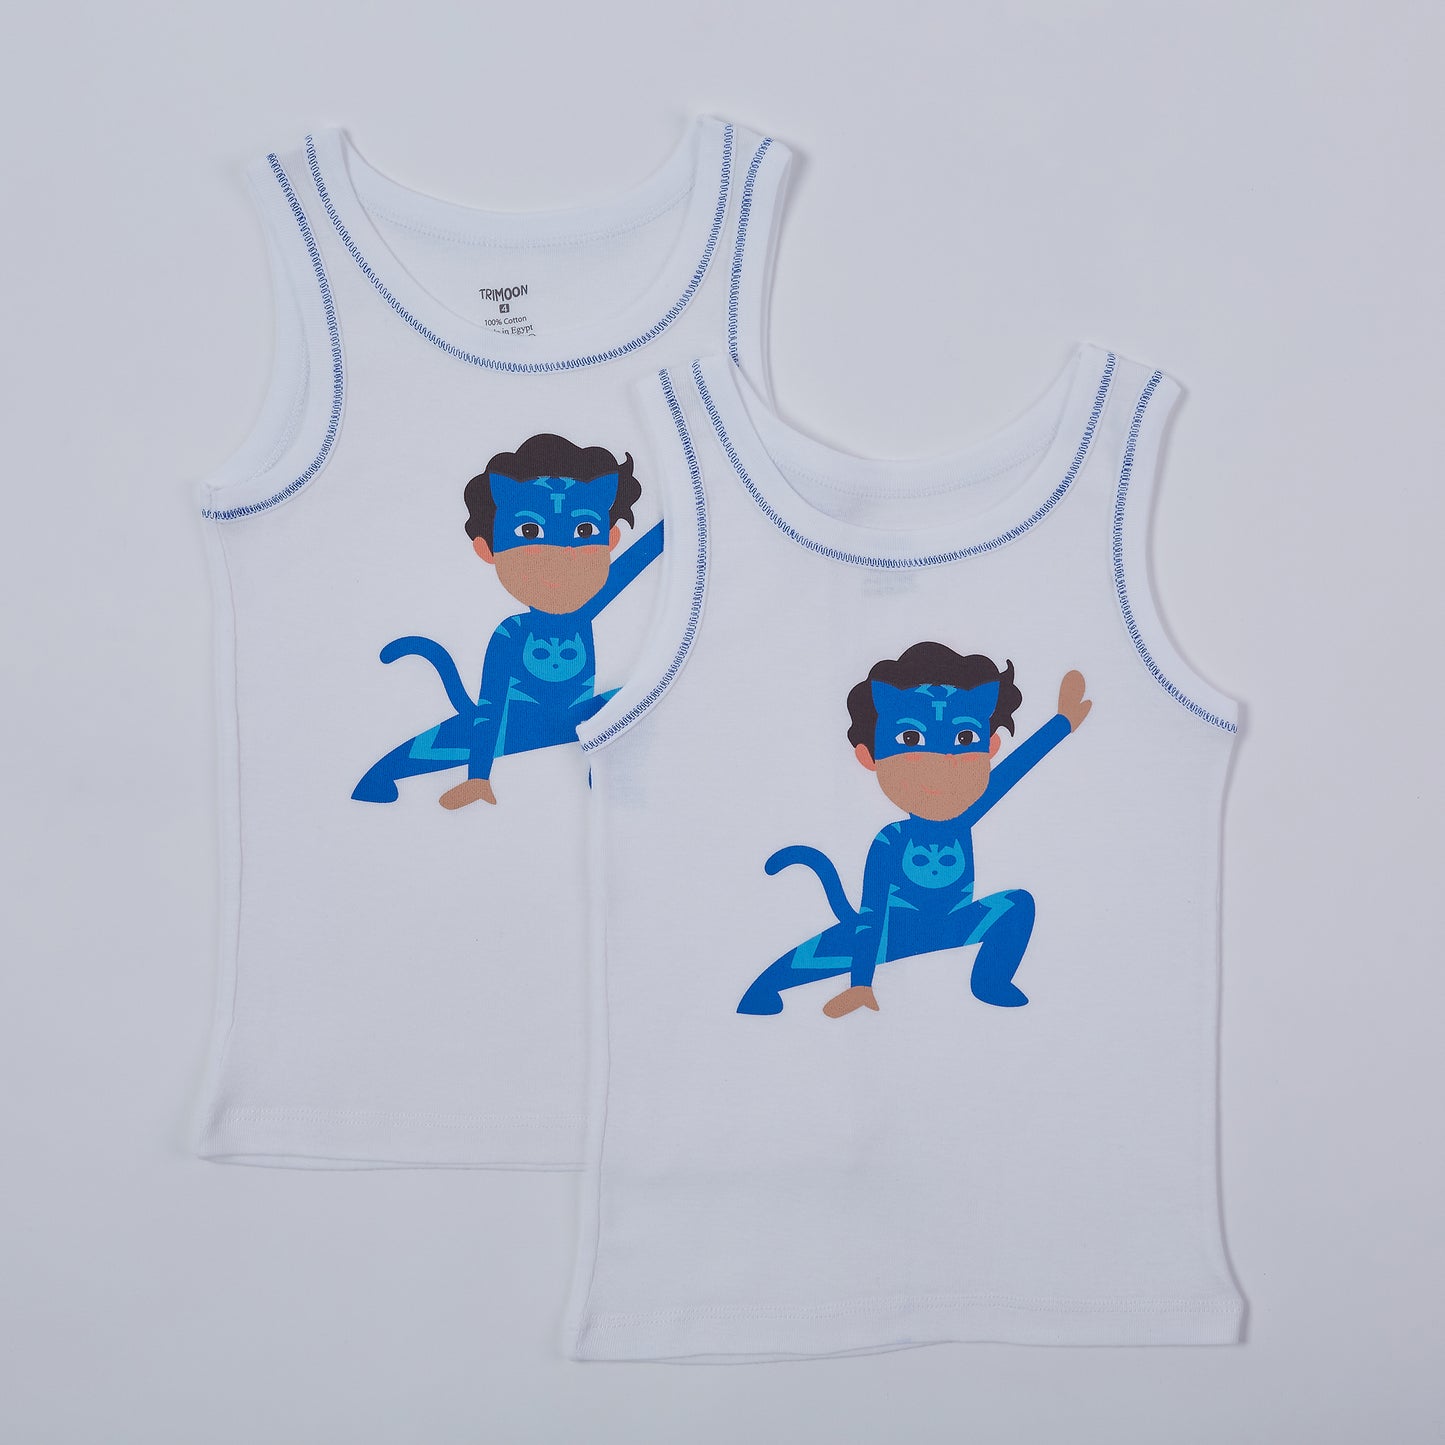 Trimoon Pack of 2 Brand New Undershirts For Boys -  threo Patrol